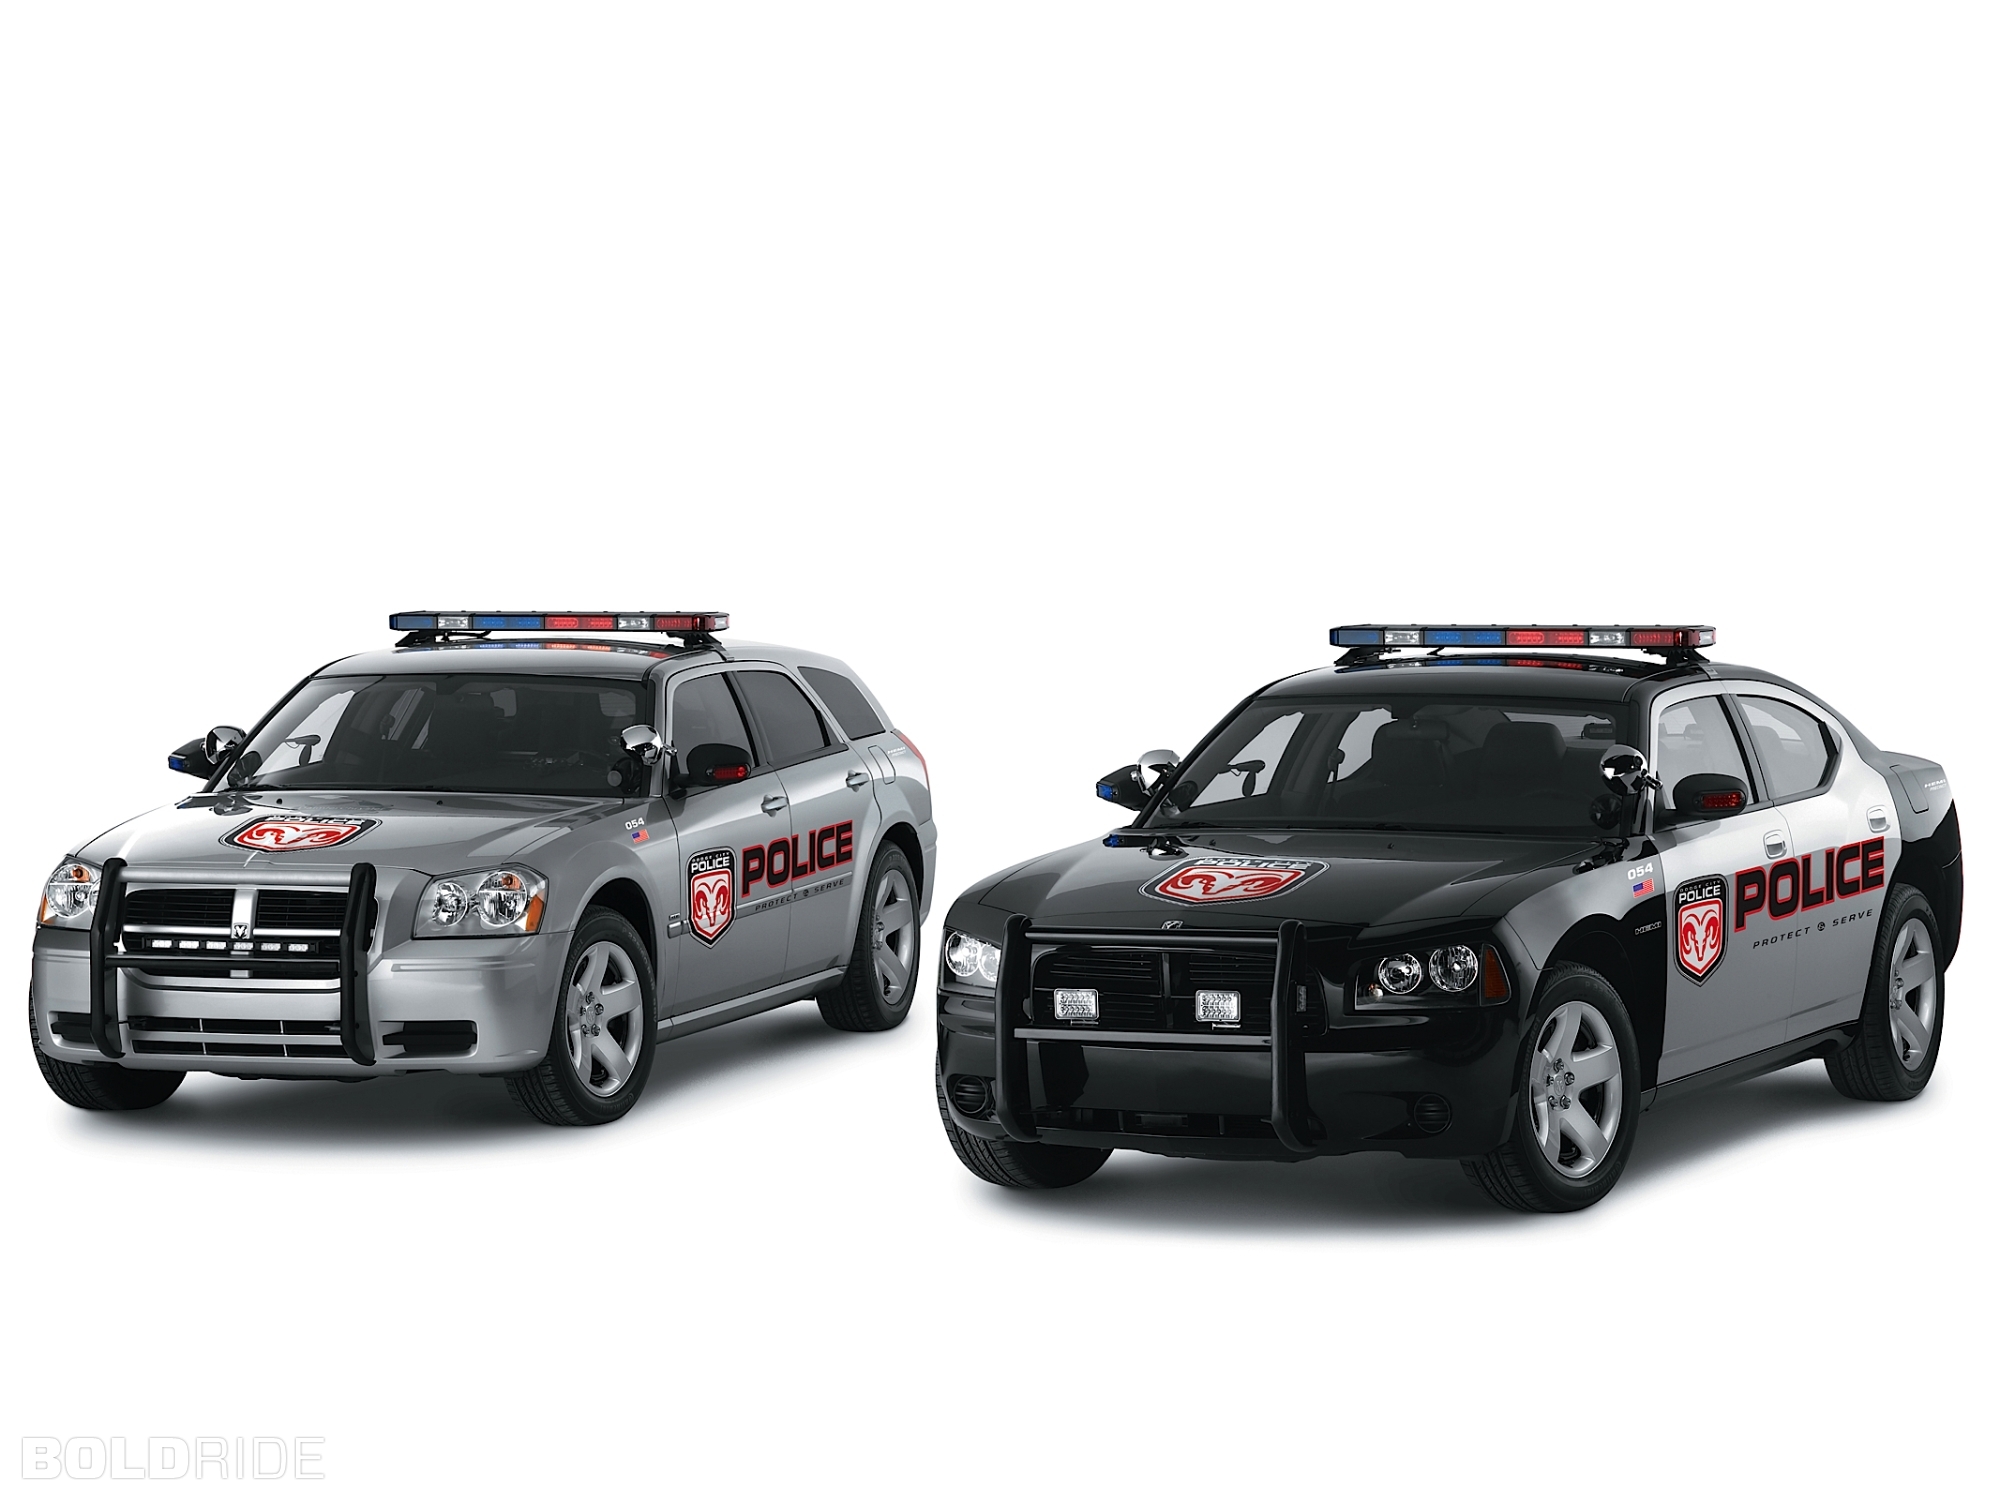 2006, Dodge, Magnum, Police, Stationwagon, Muscle, Charger Wallpaper